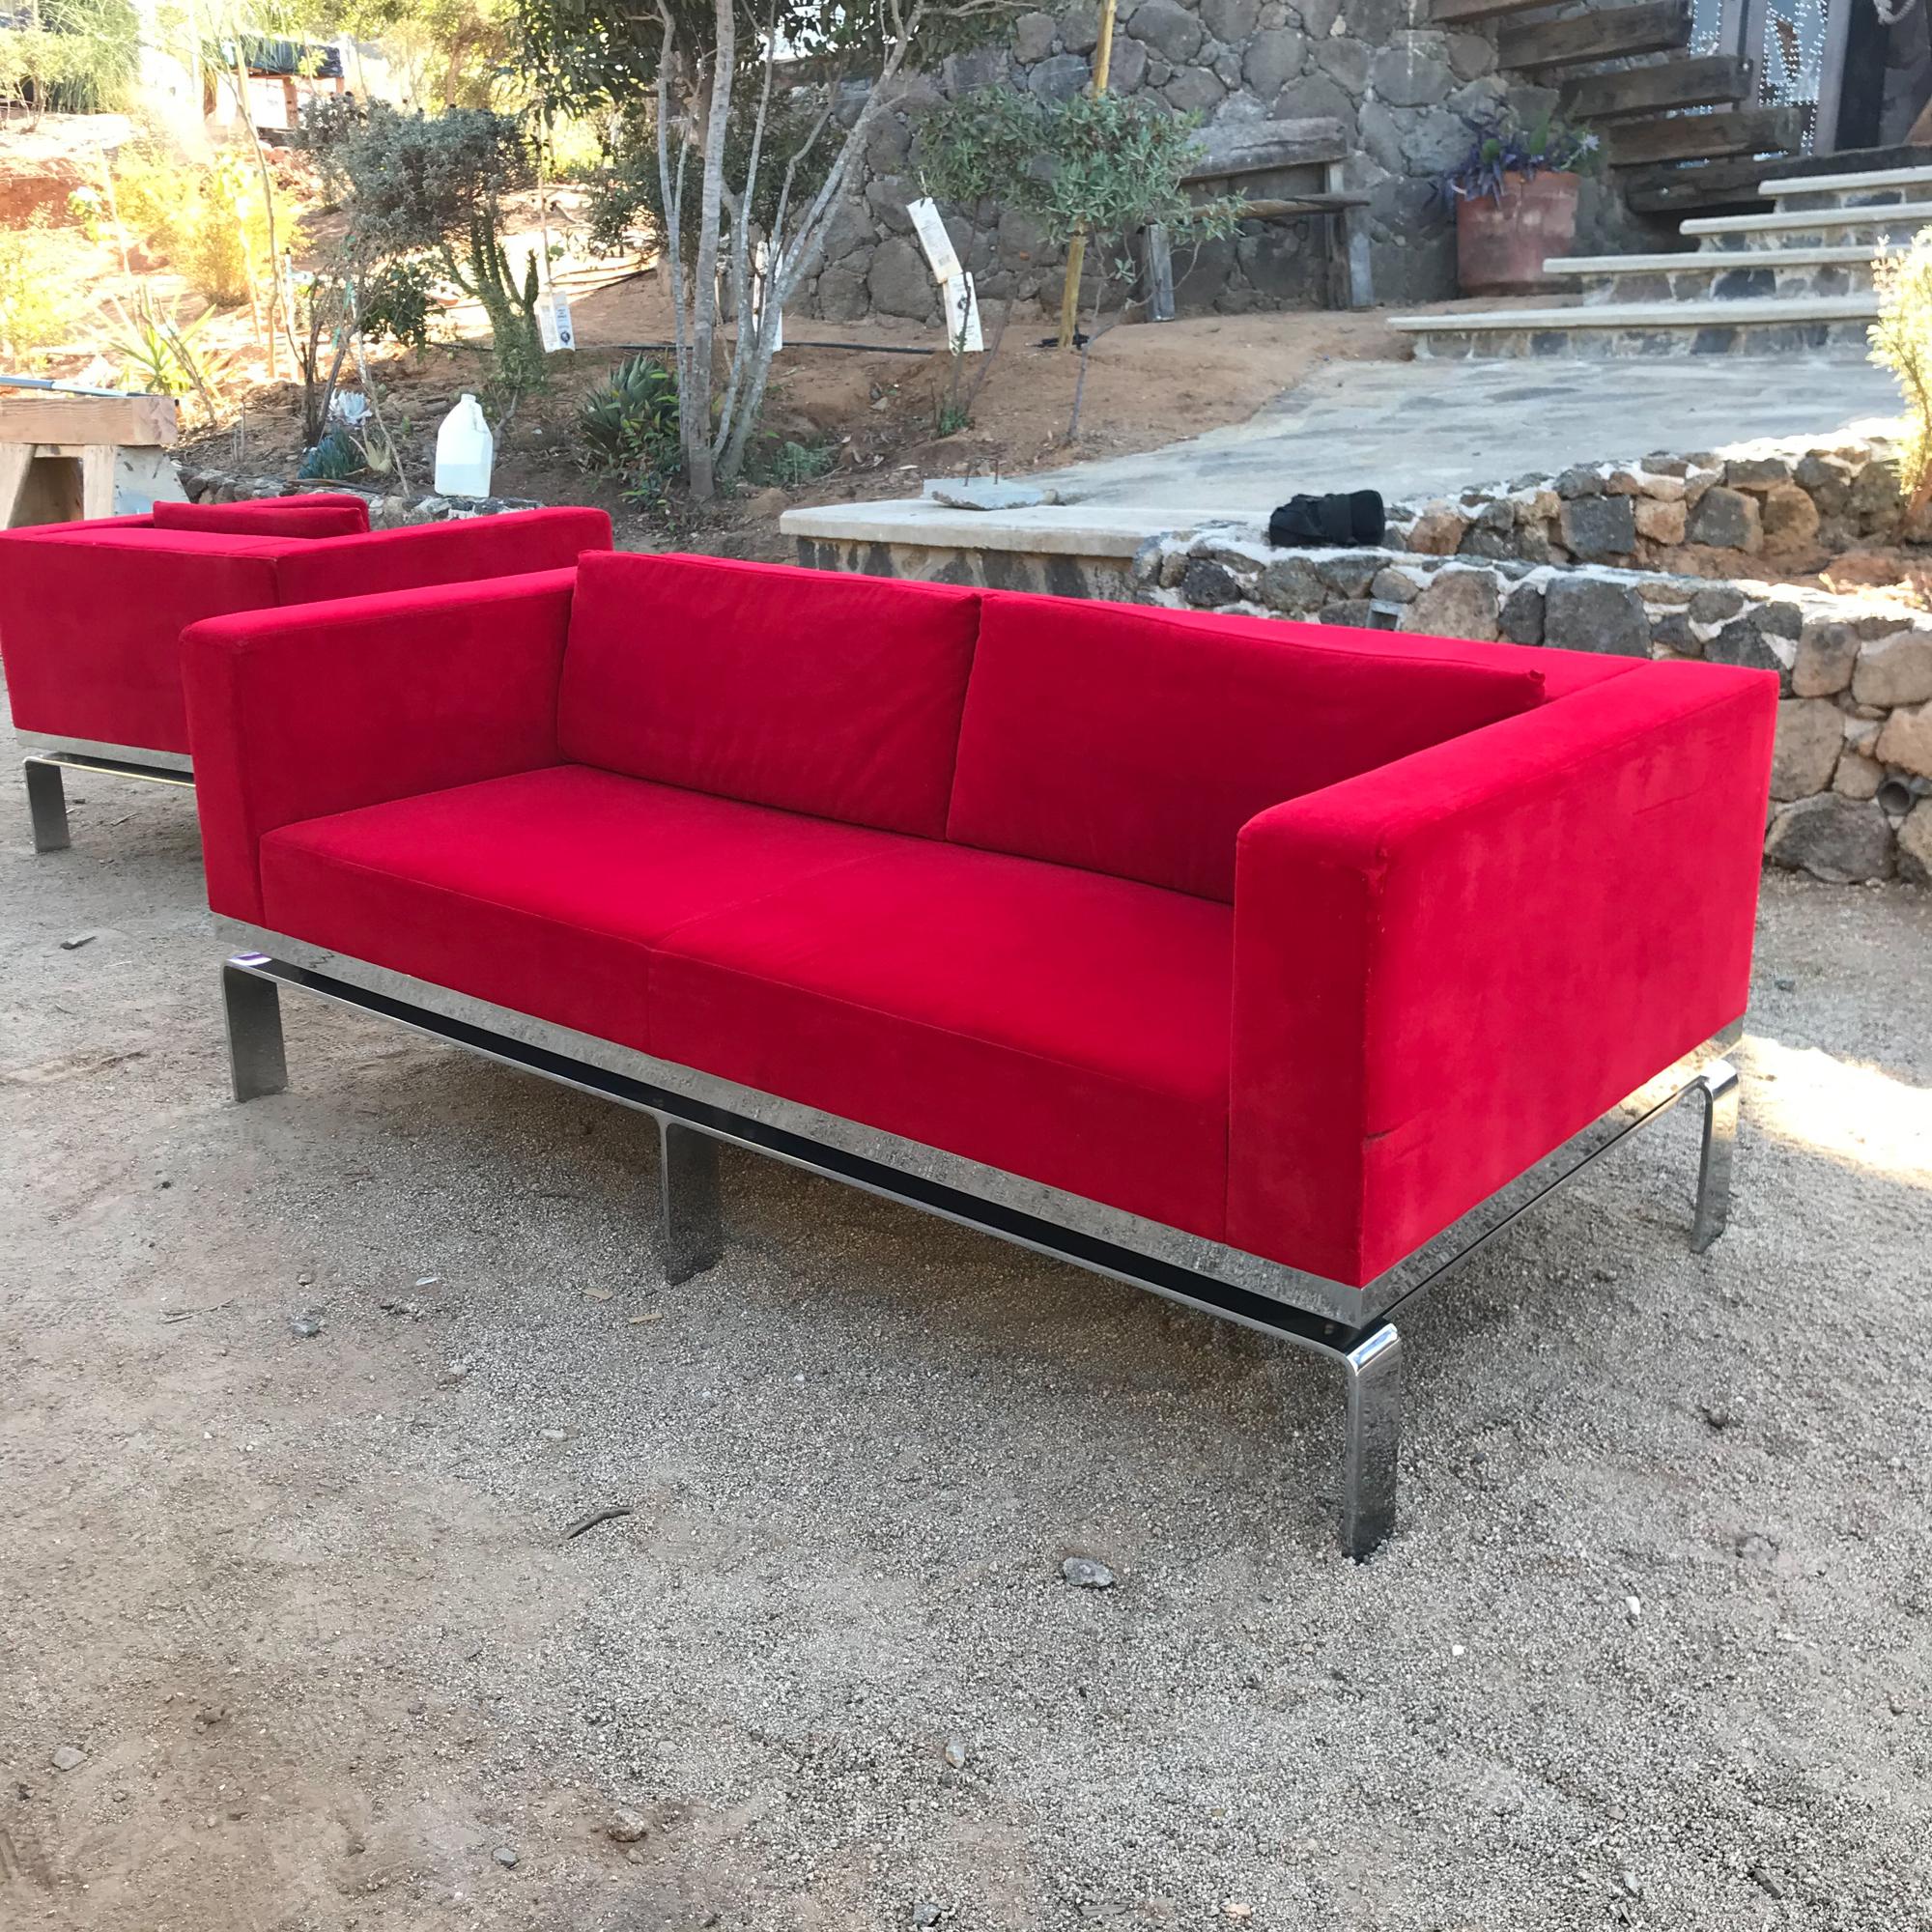 Red Sofa
Contemporary Chrome SOFA upscale elegant Red by designers Collin Burry & Terry Walker for Martin Brattrud of California
Reminiscent of Milo Baughman midcentury design.
Trimmed in Chrome Plated Steel.
Original Upholstery in RED.
Not new but